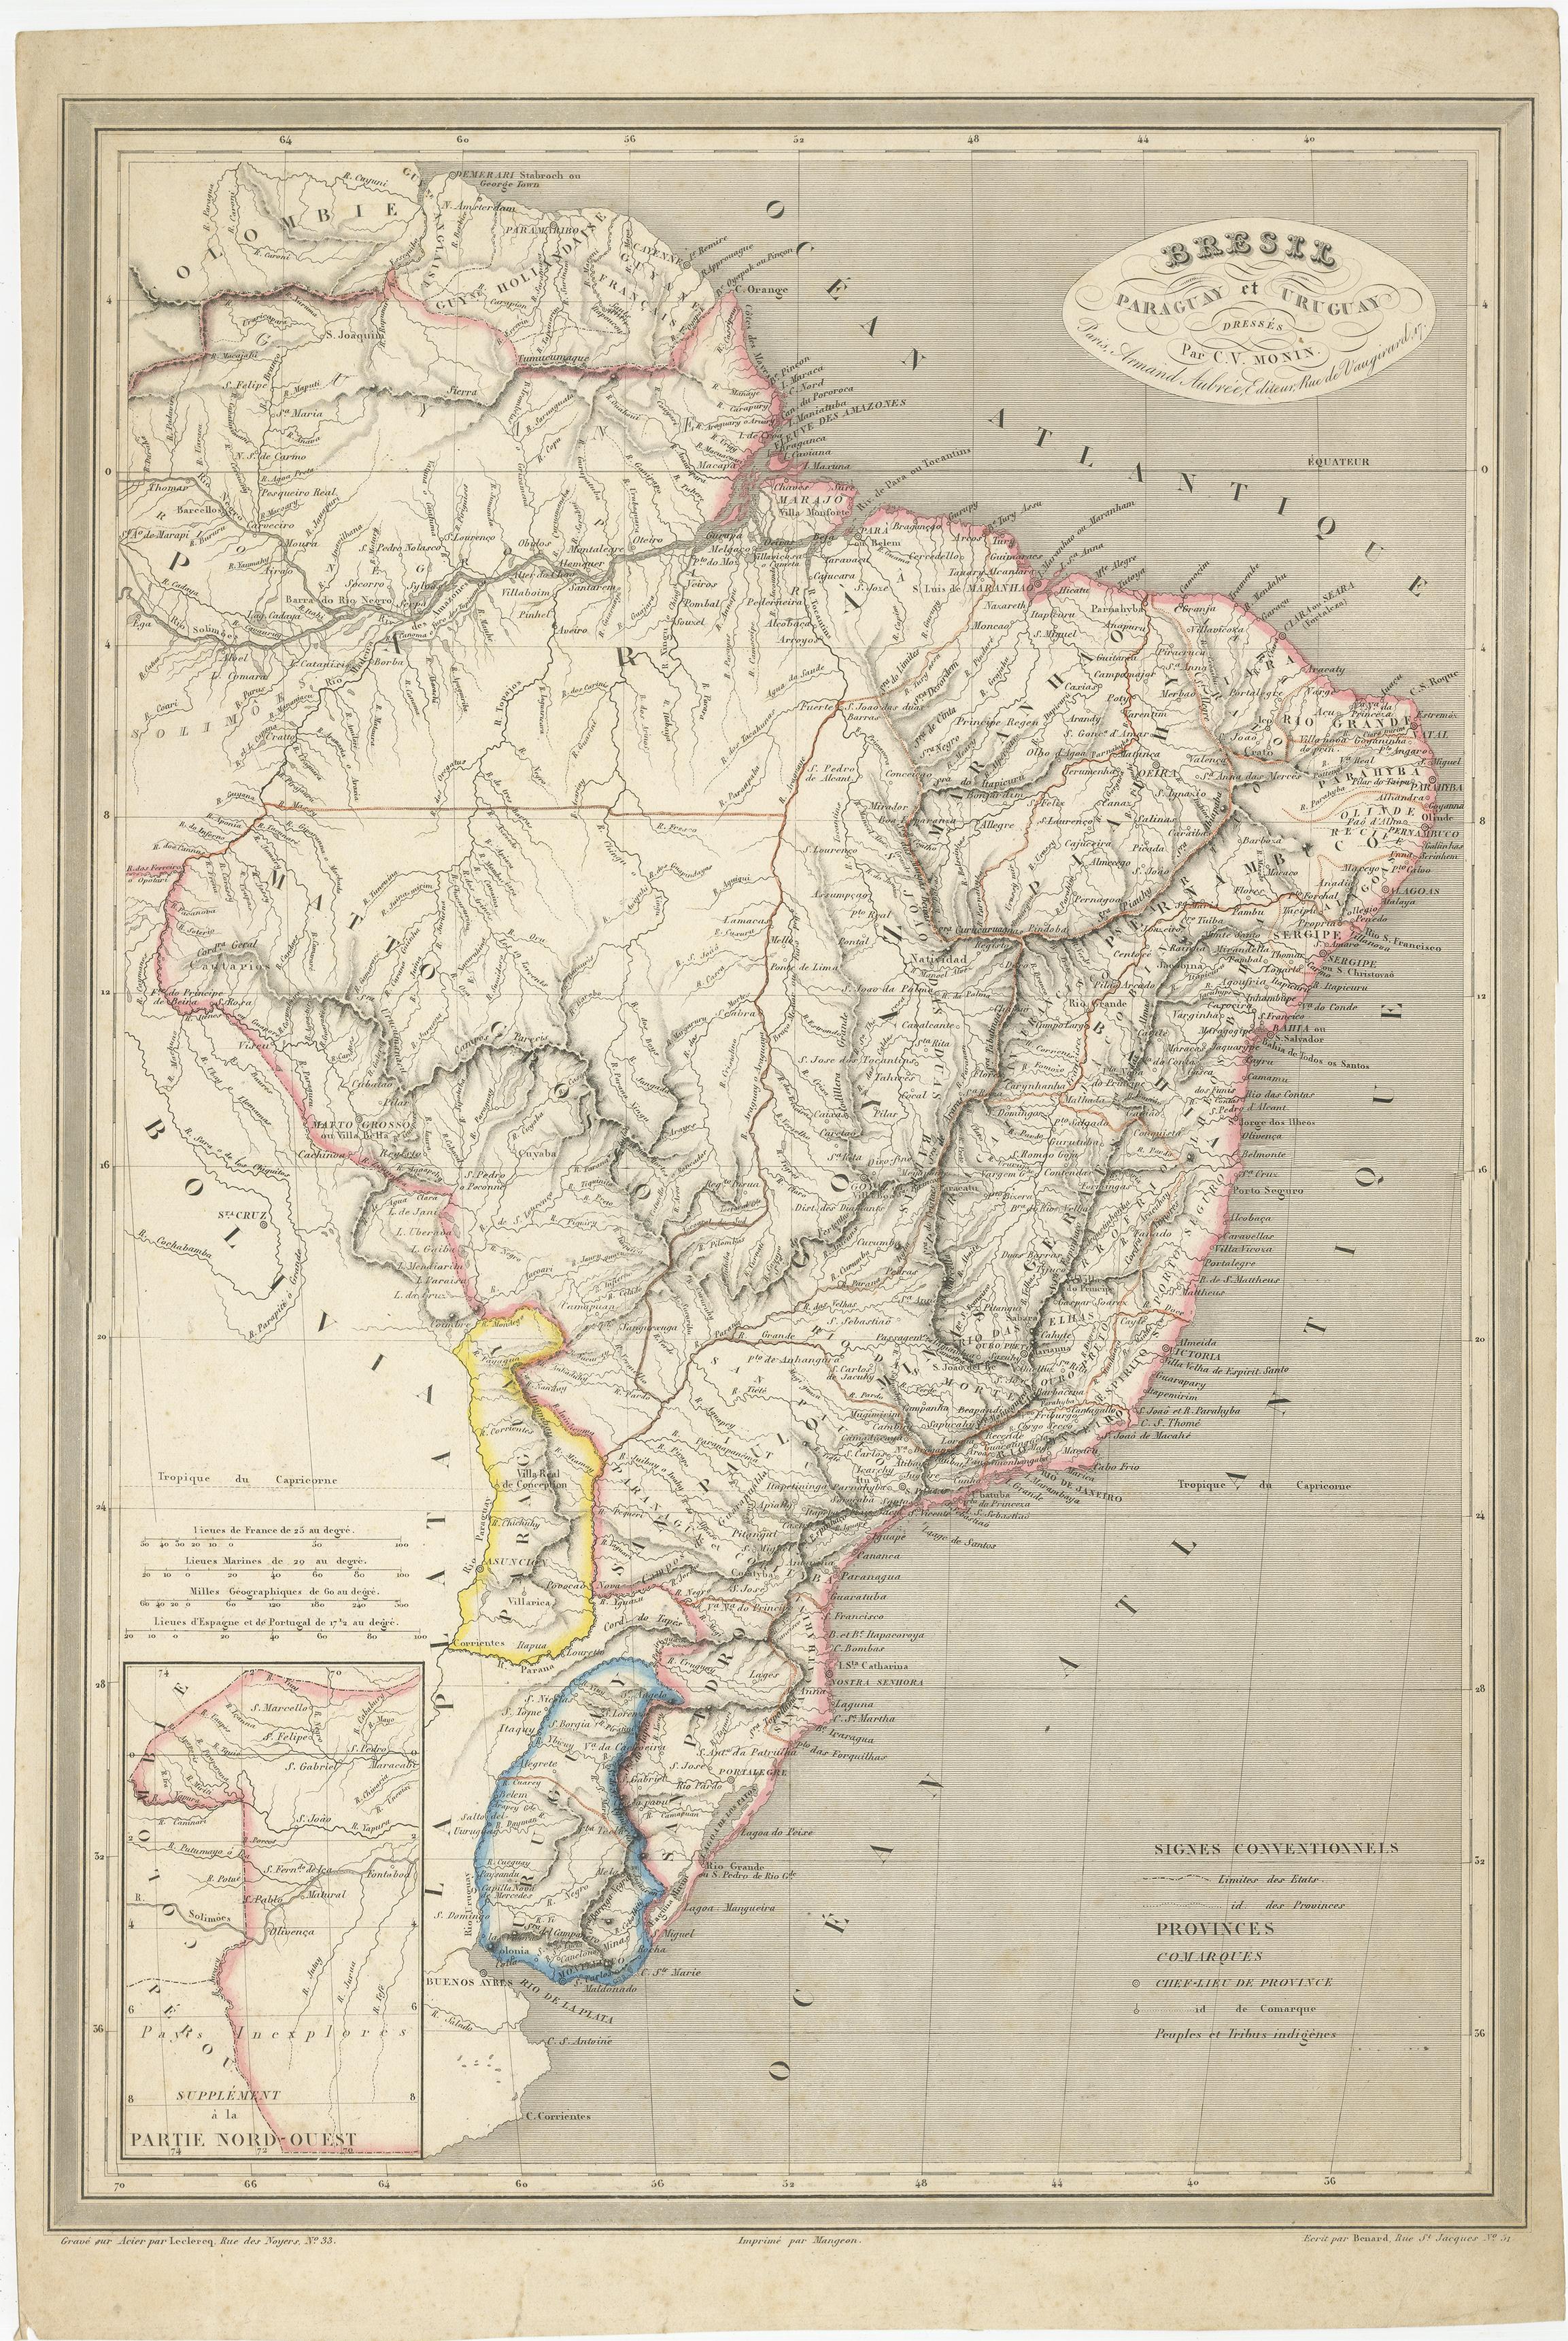 map of paraguay in south america